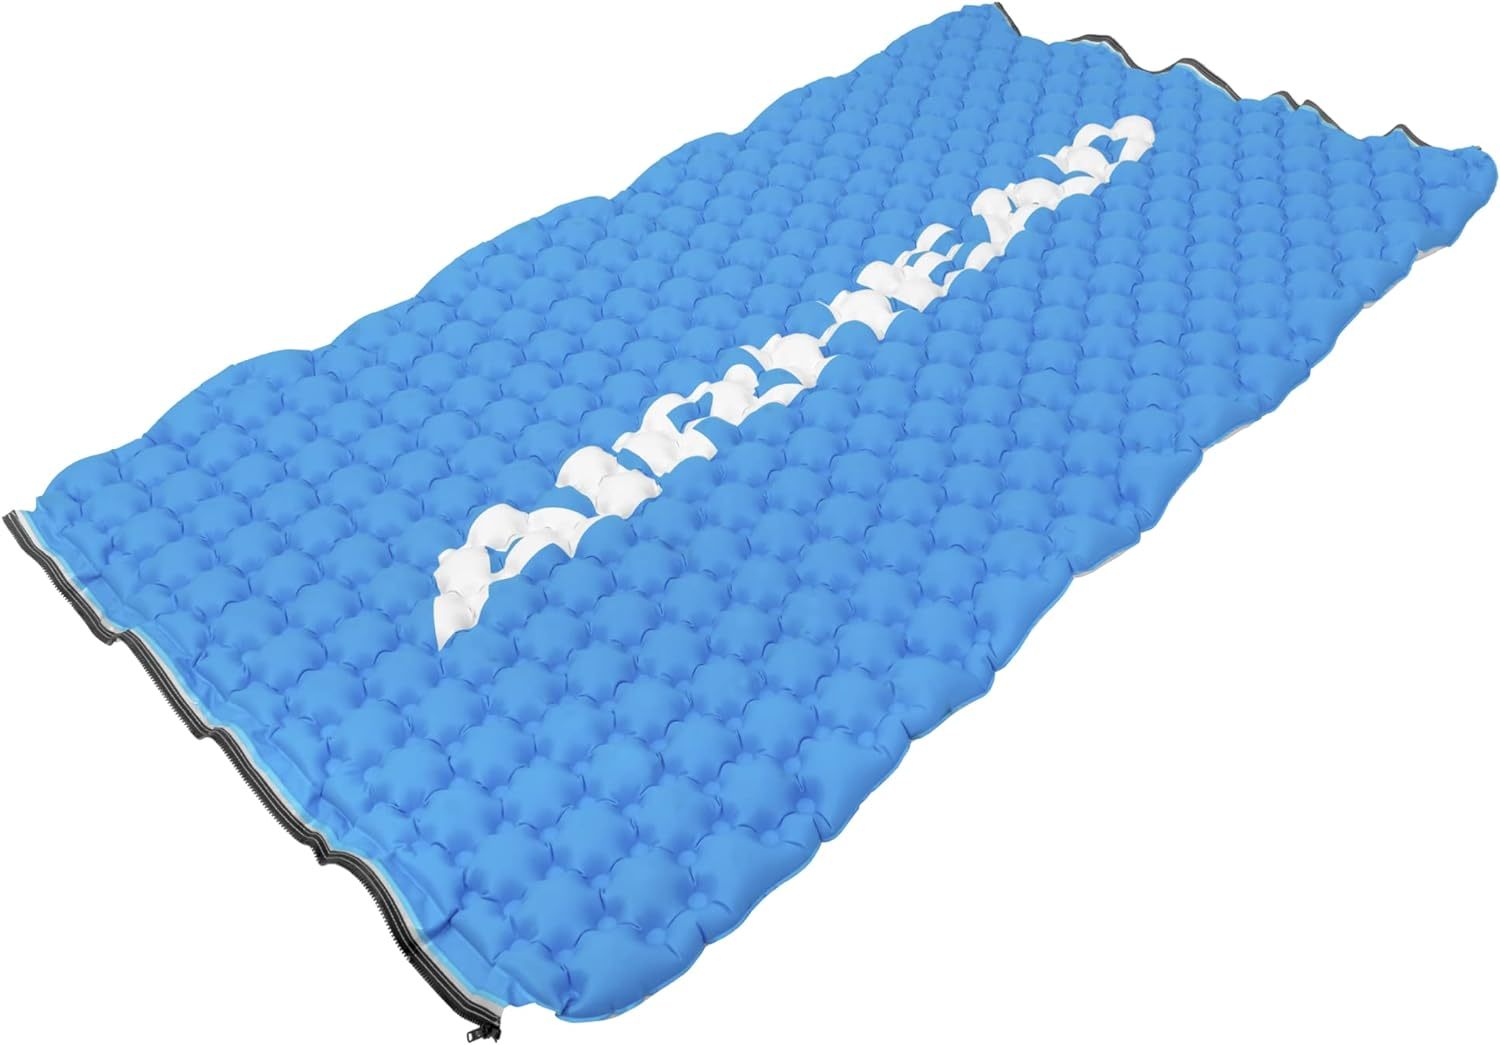 Airhead Air Island, Inflatable Large Lake Float, Multiple Colors Available. - $102.95